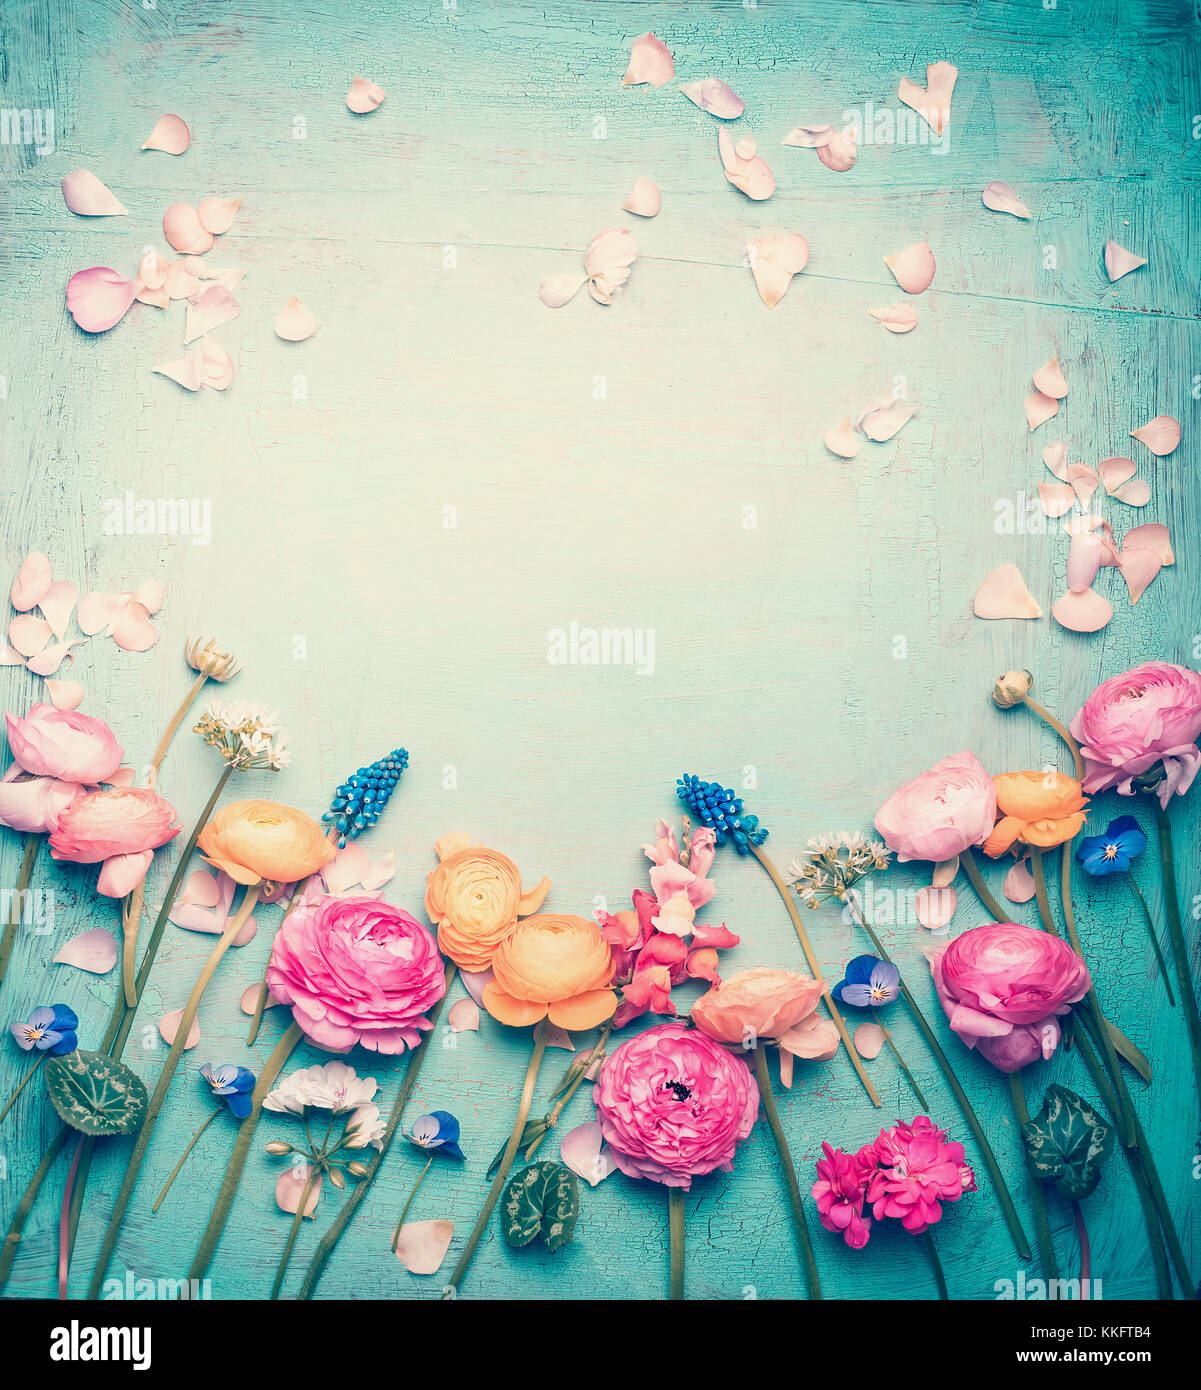 Floral frame with Lovely flowers and petals, retro pastel toned on vintage  turquoise background, top view Stock Photo - Alamy